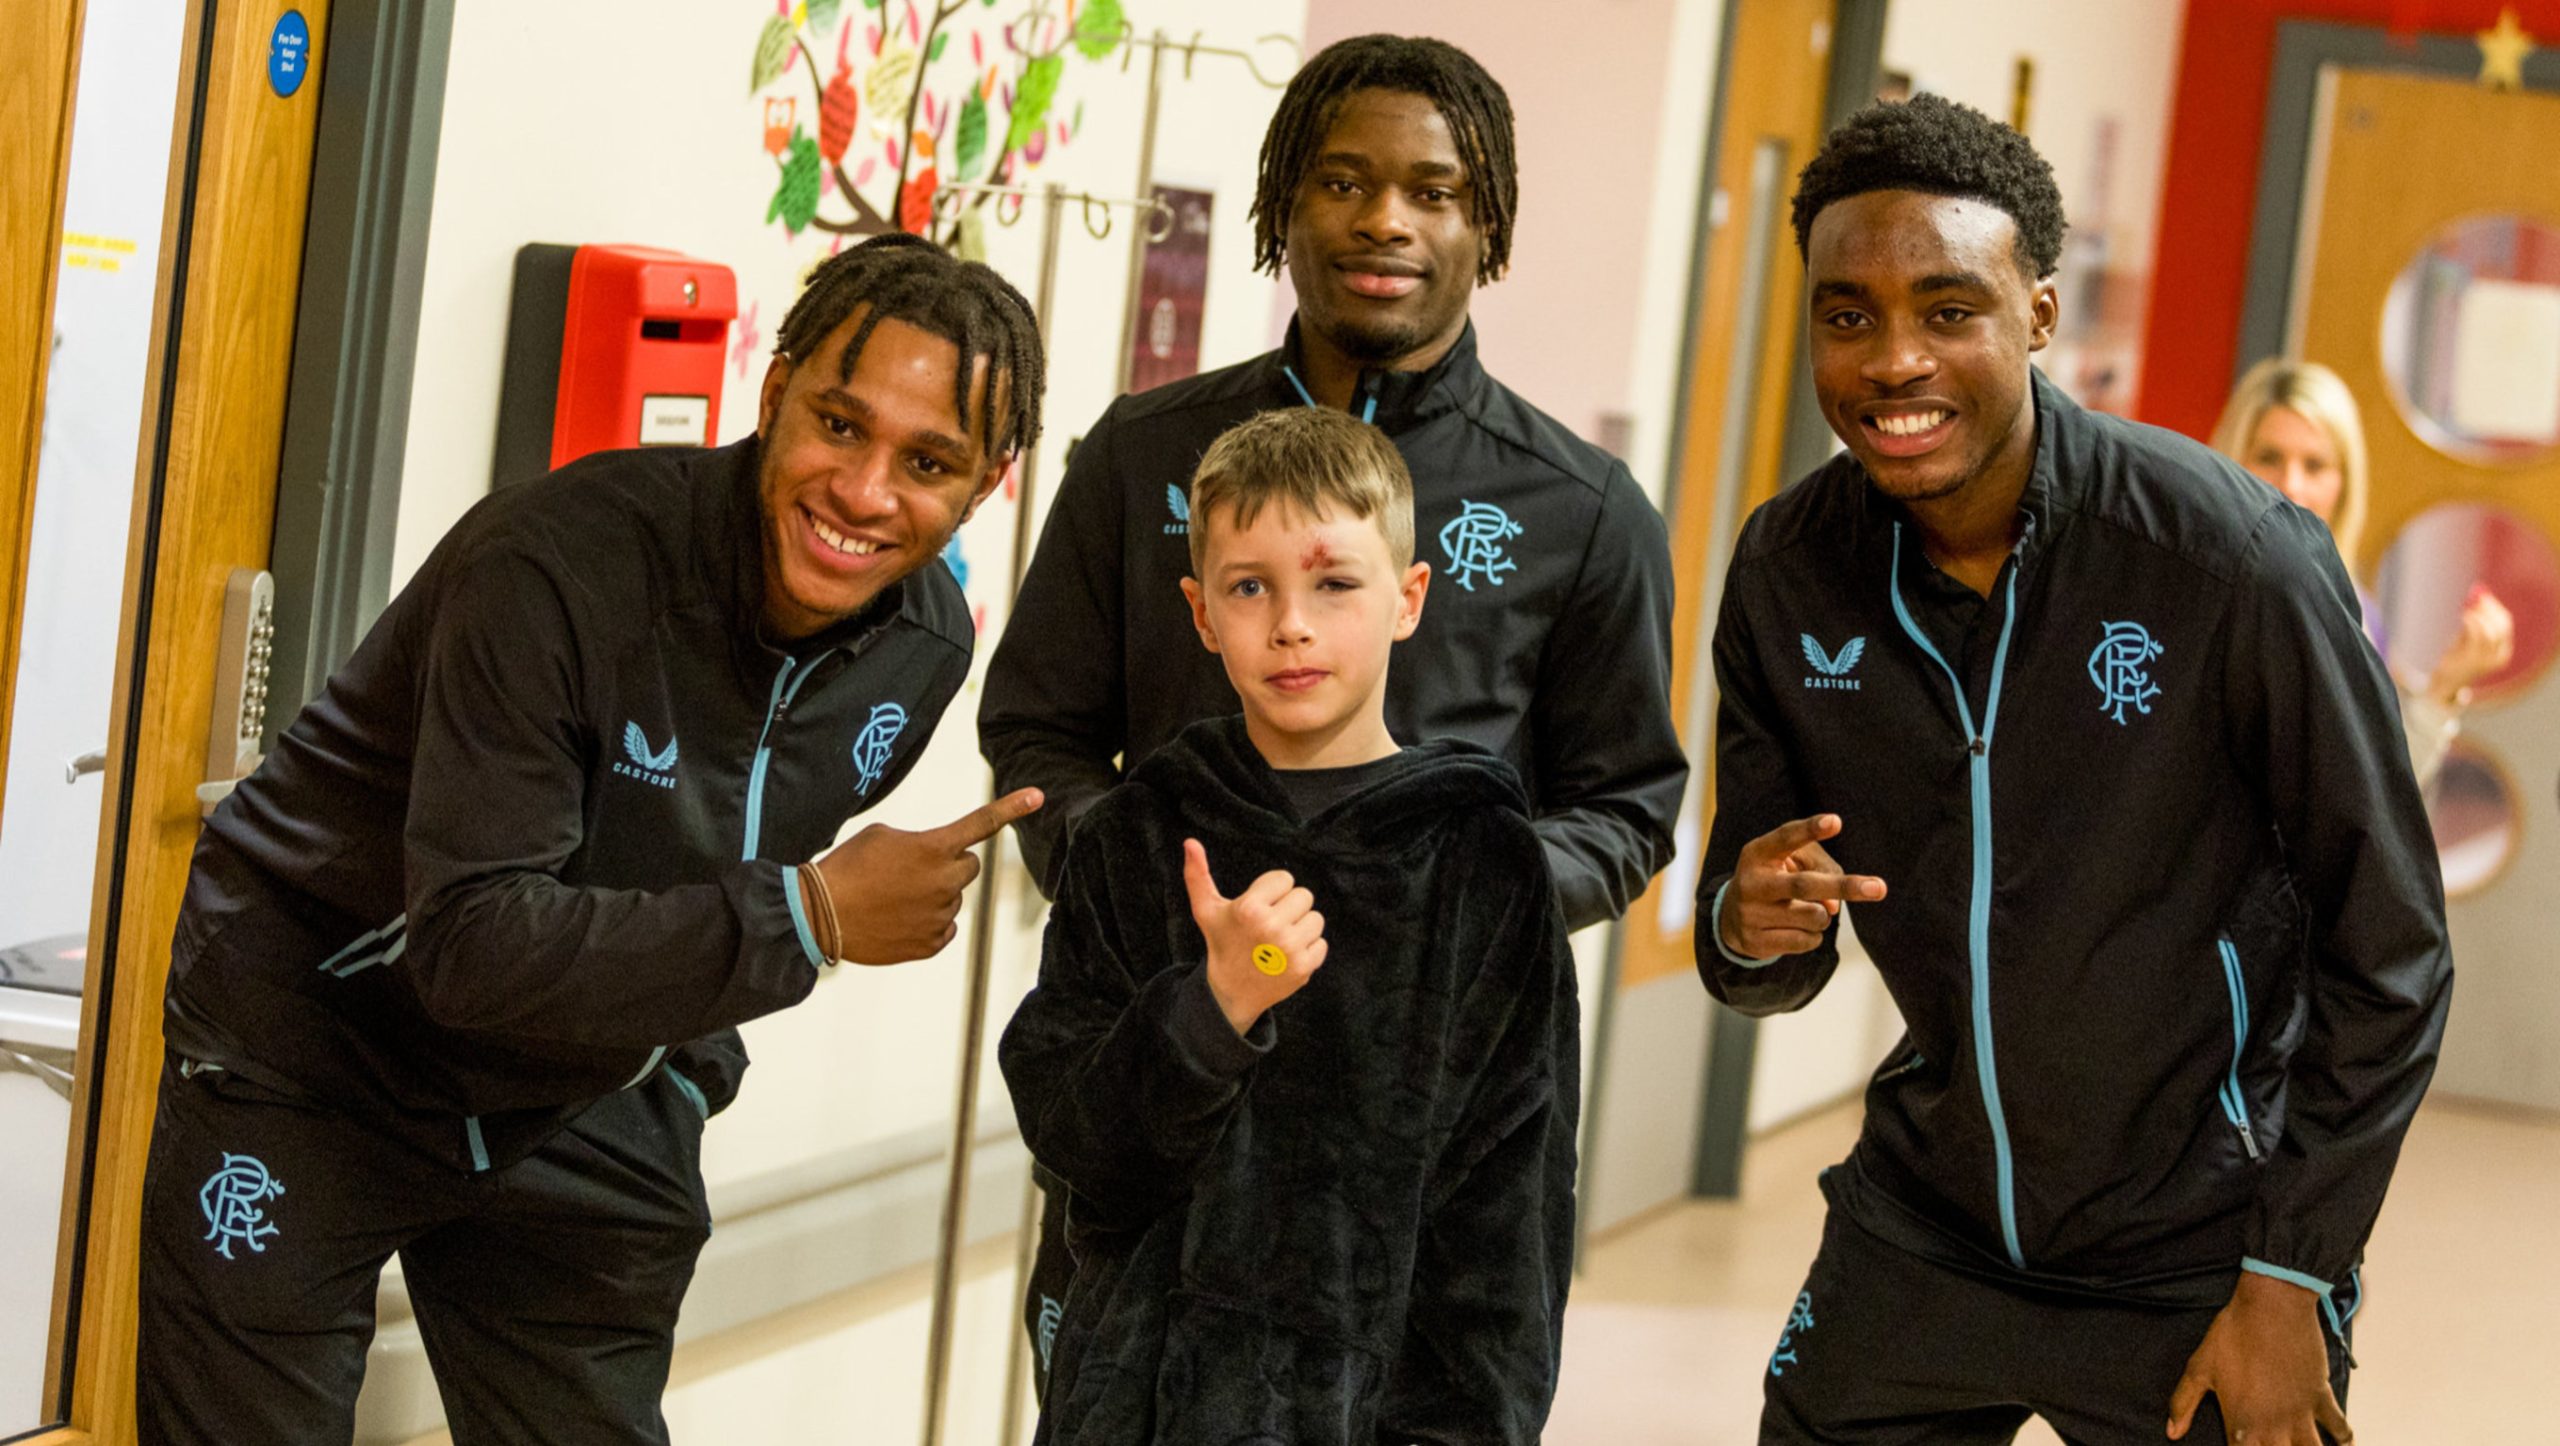 Academy players at Children's Hospital